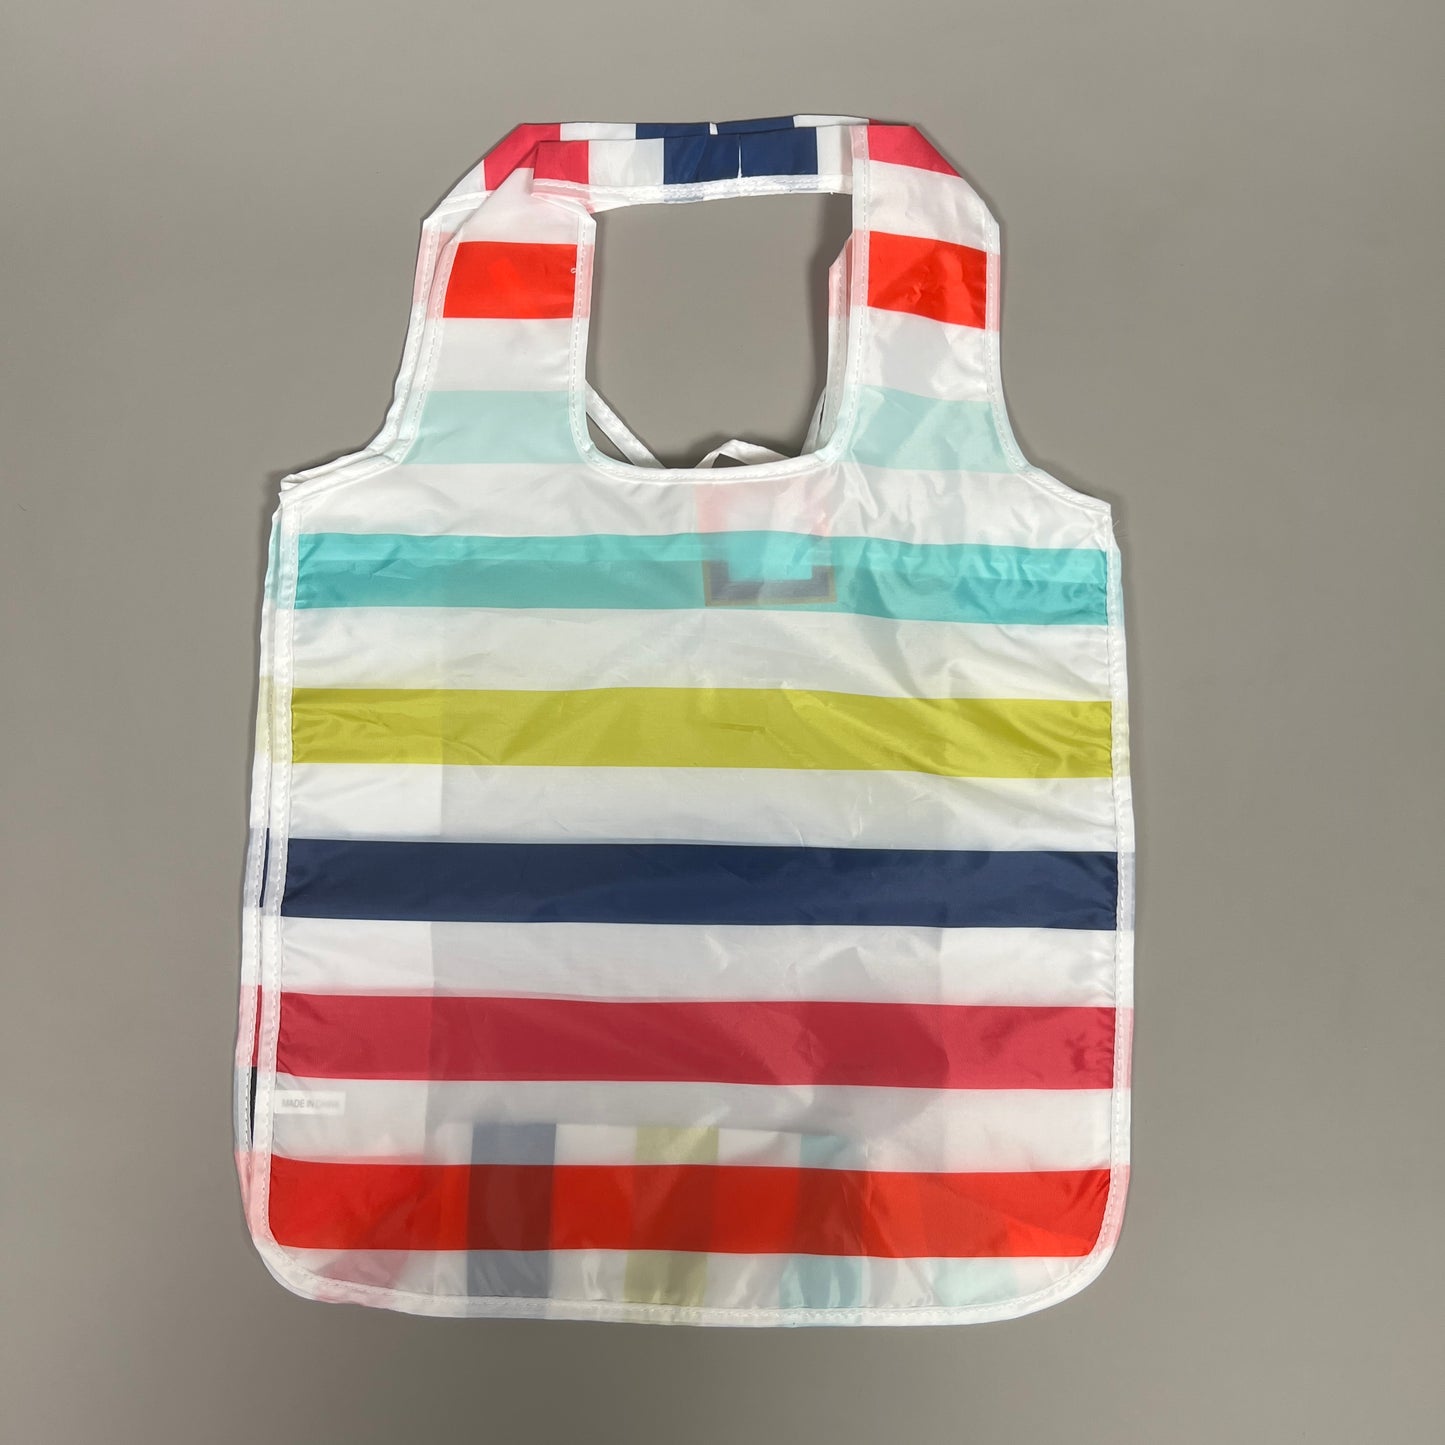 KATE SPADE Candy Stripe Reusable Shopping Tote (New)